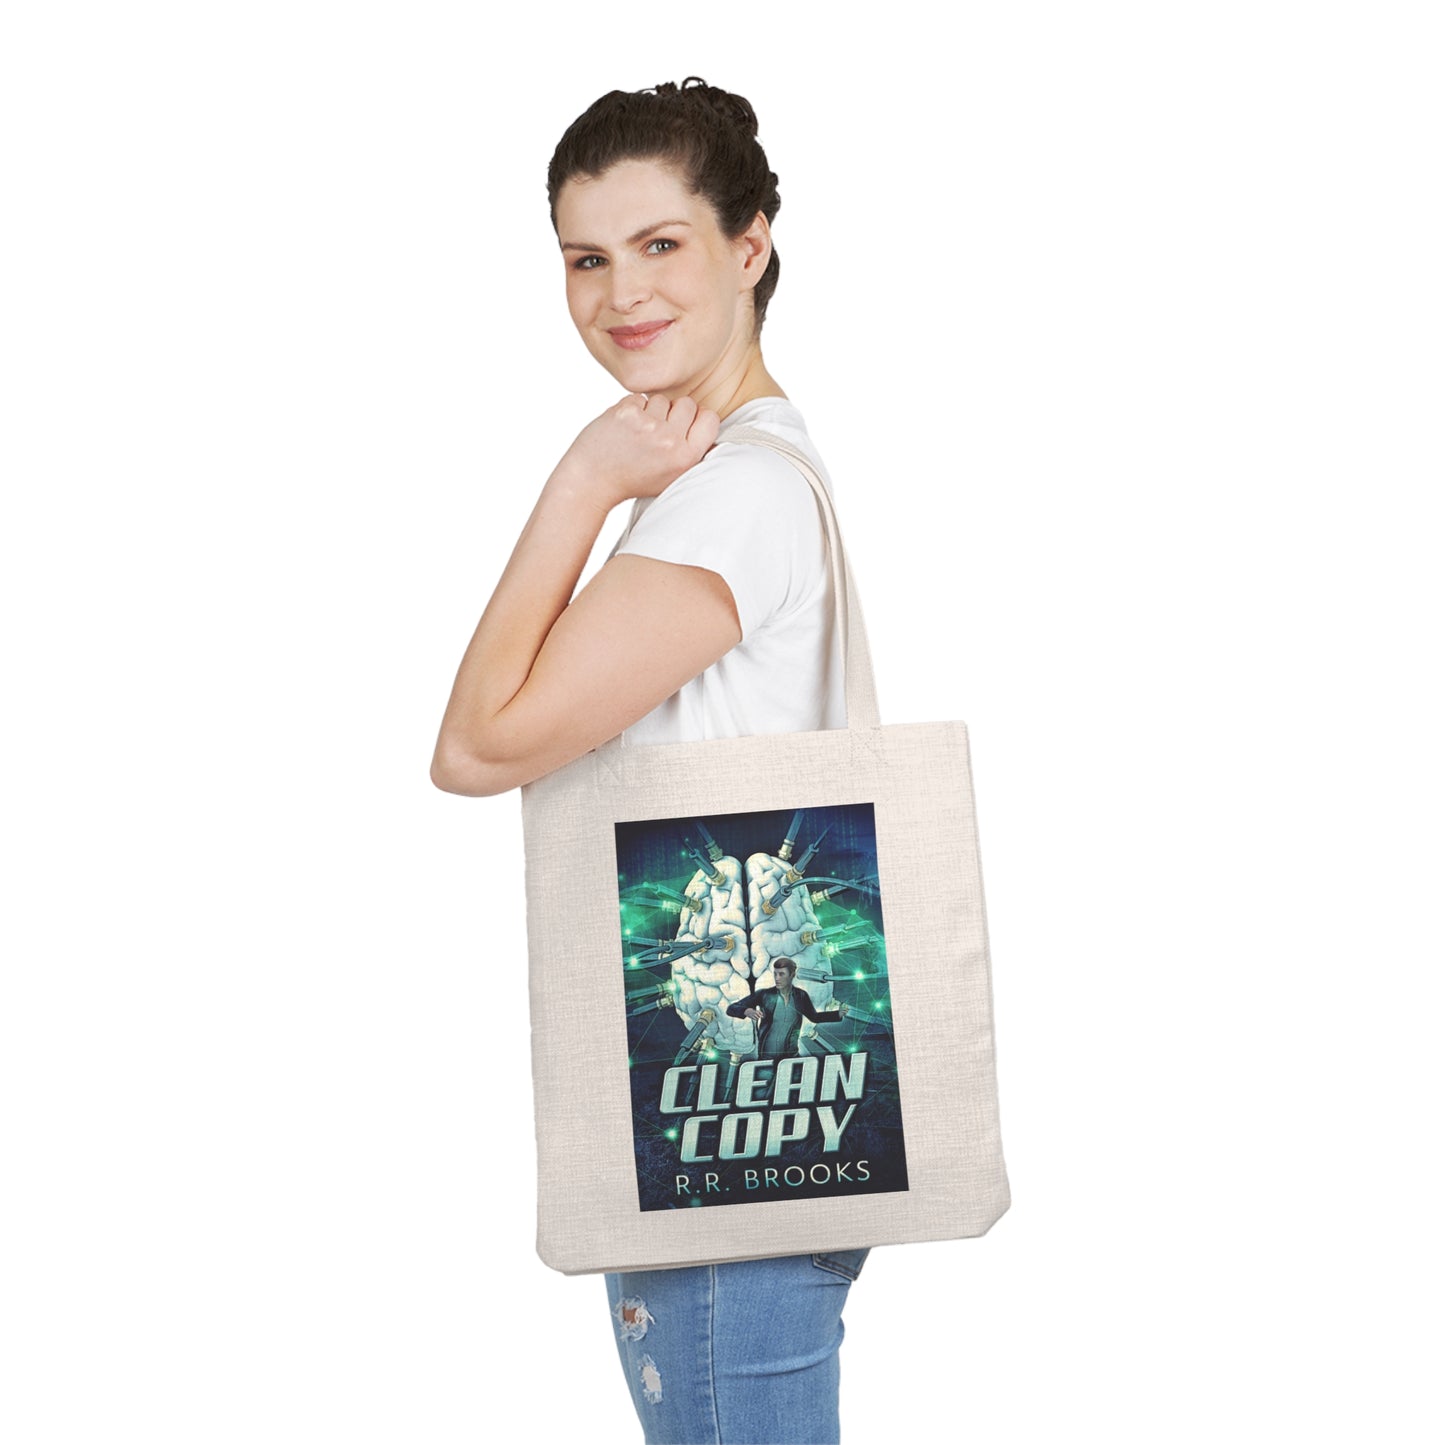 Clean Copy - Lightweight Tote Bag